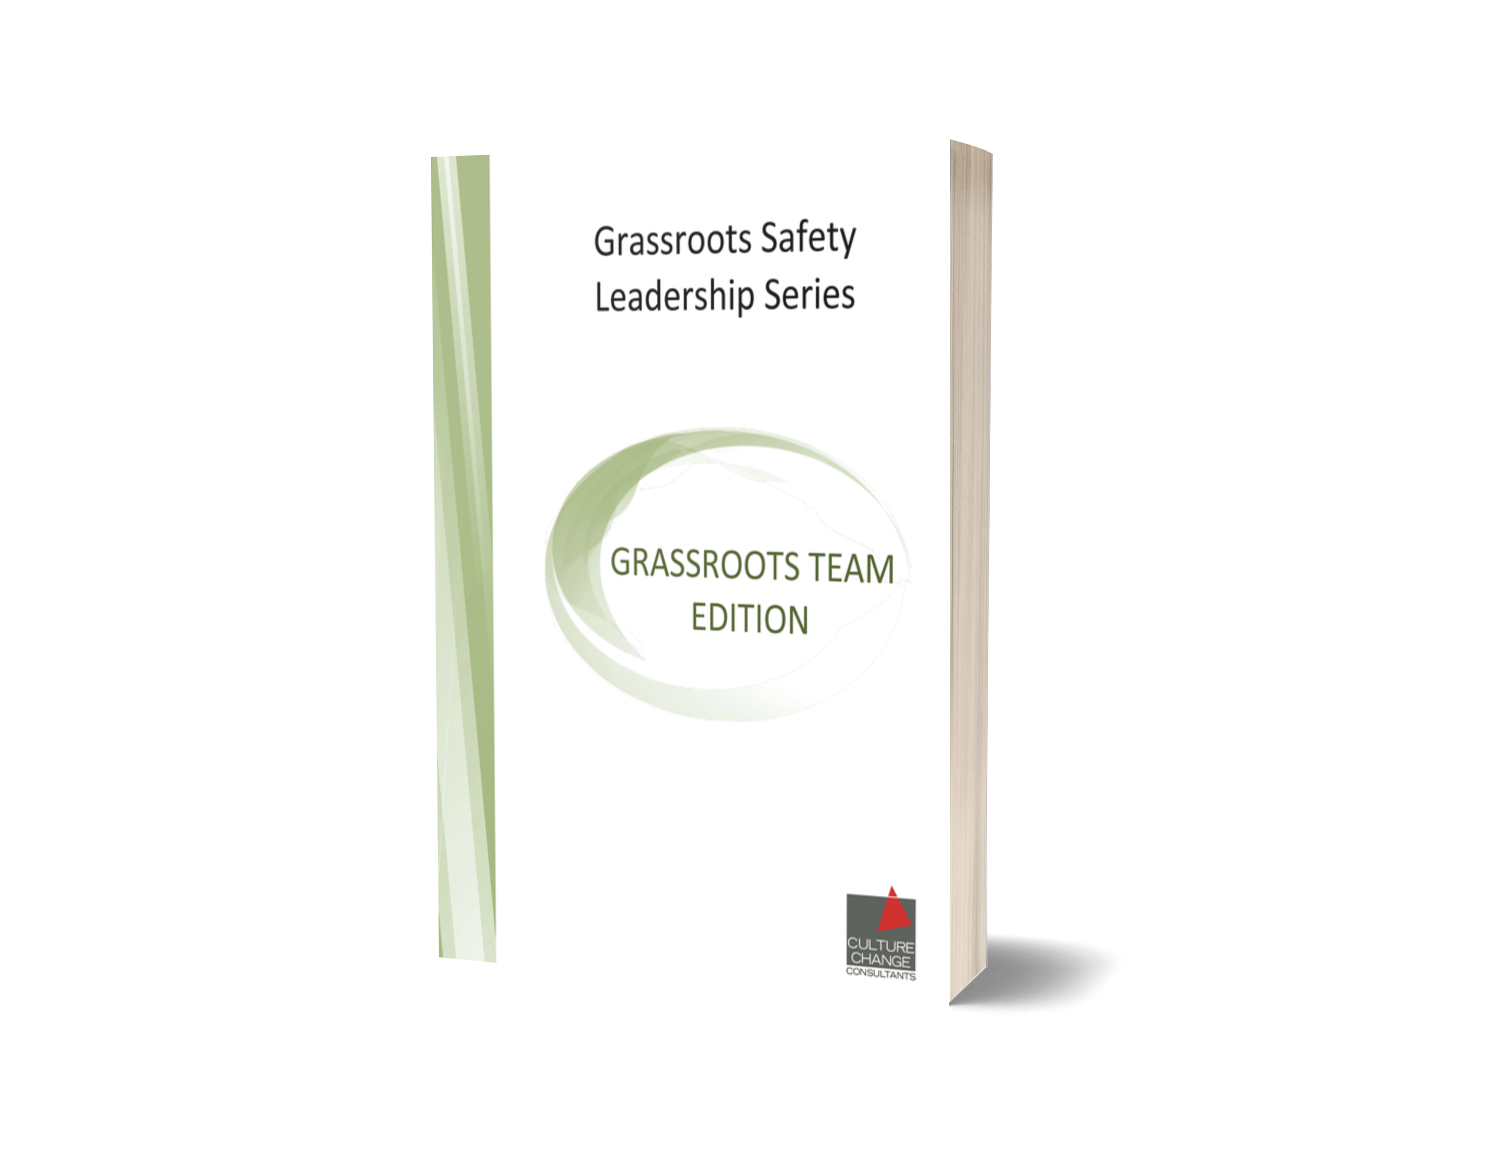 Grassroots Safety Leadership